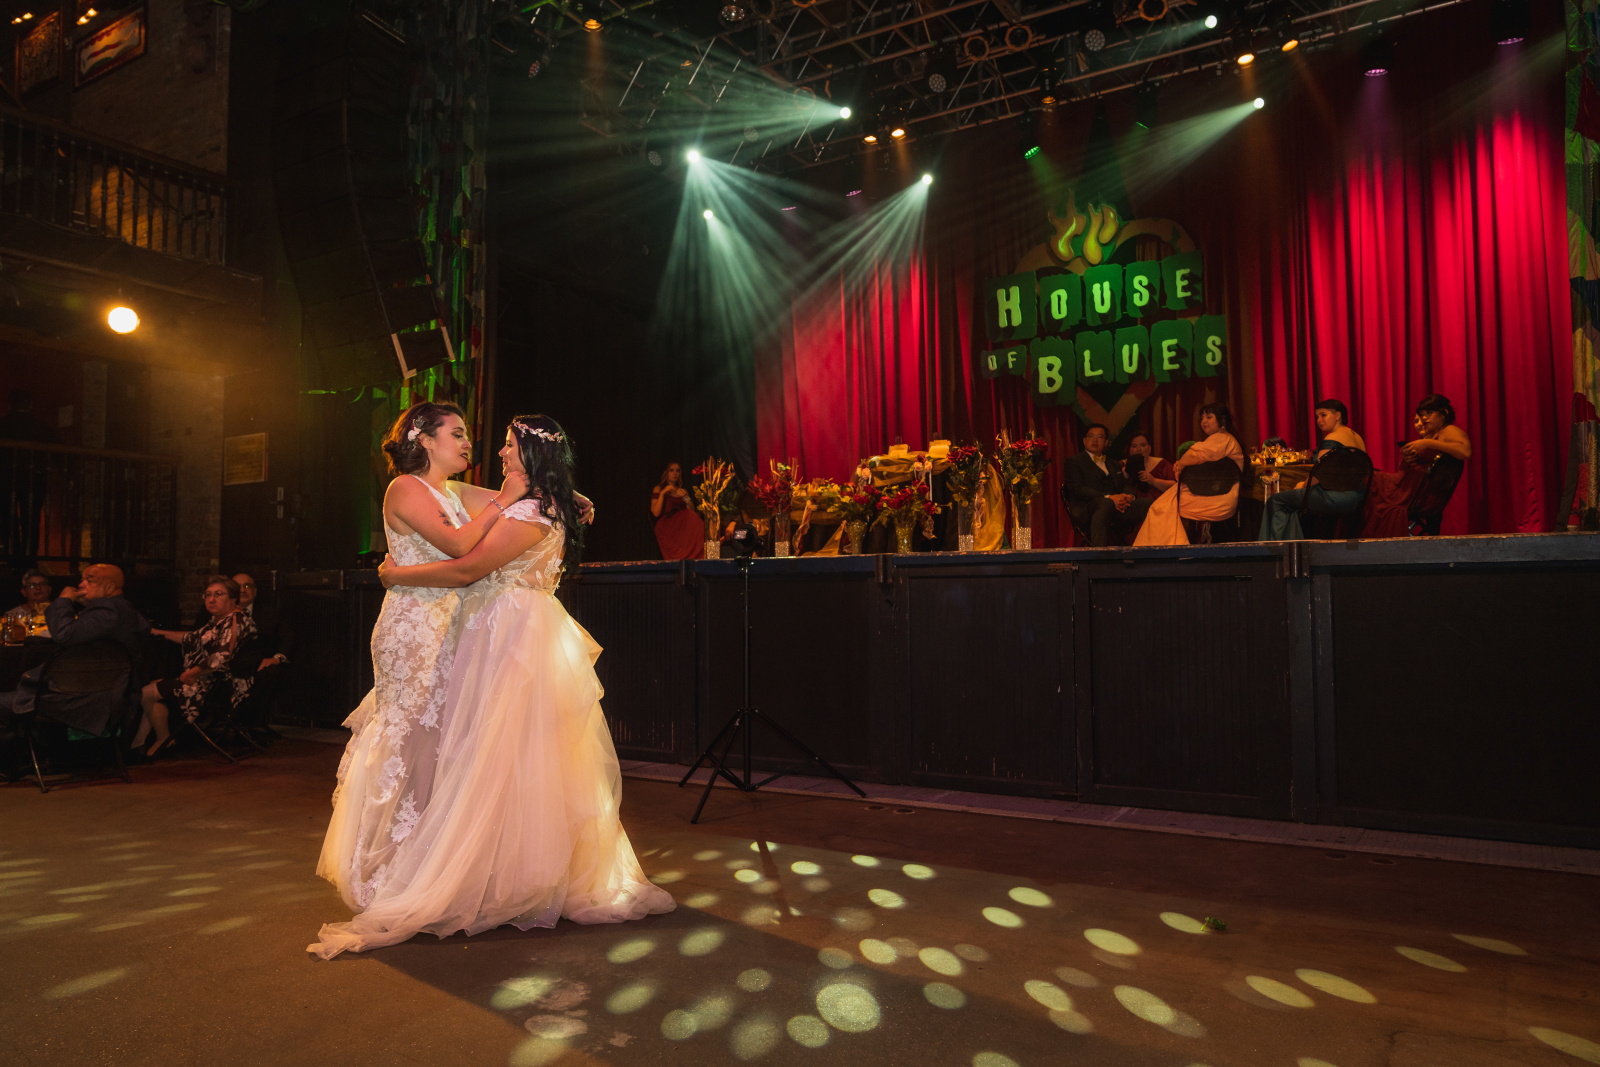 Two brides first dance, beautiful, classic, two wedding dresses, love is love, beautiful lesbian wedding at the House of Blues